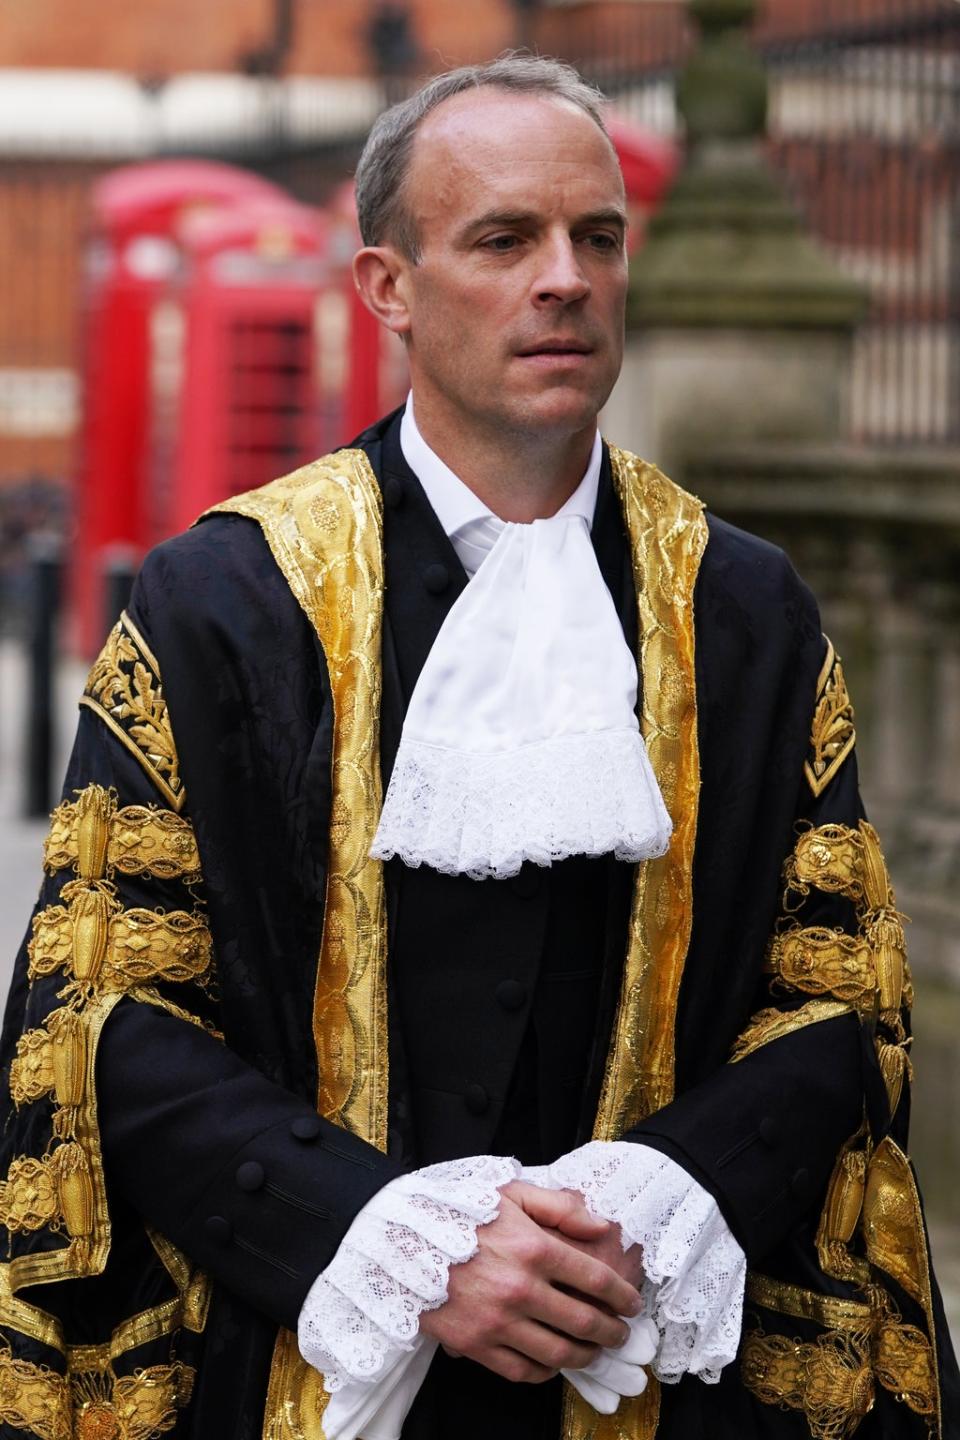 Dominic Raab arrives at the Judge’s entrance to the Royal Courts of Justice in London, ahead of his swearing in ceremony as Lord Chancellor (Gareth Fuller/PA) (PA Wire)